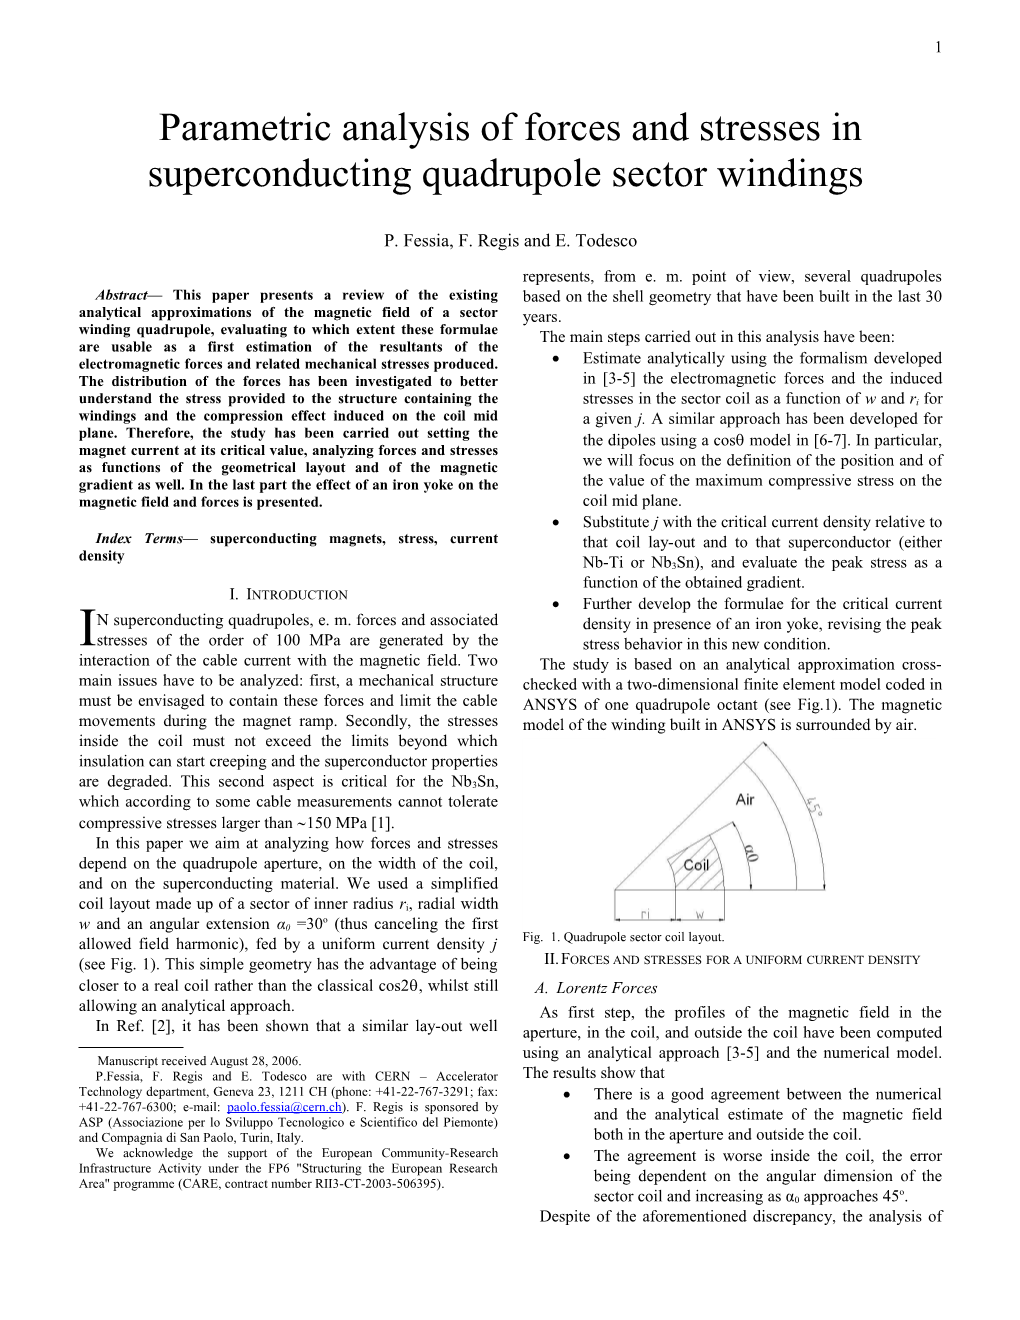 Parametric Analysis of Forces and Stresses in Superconducting Quadrupole Sector Windings